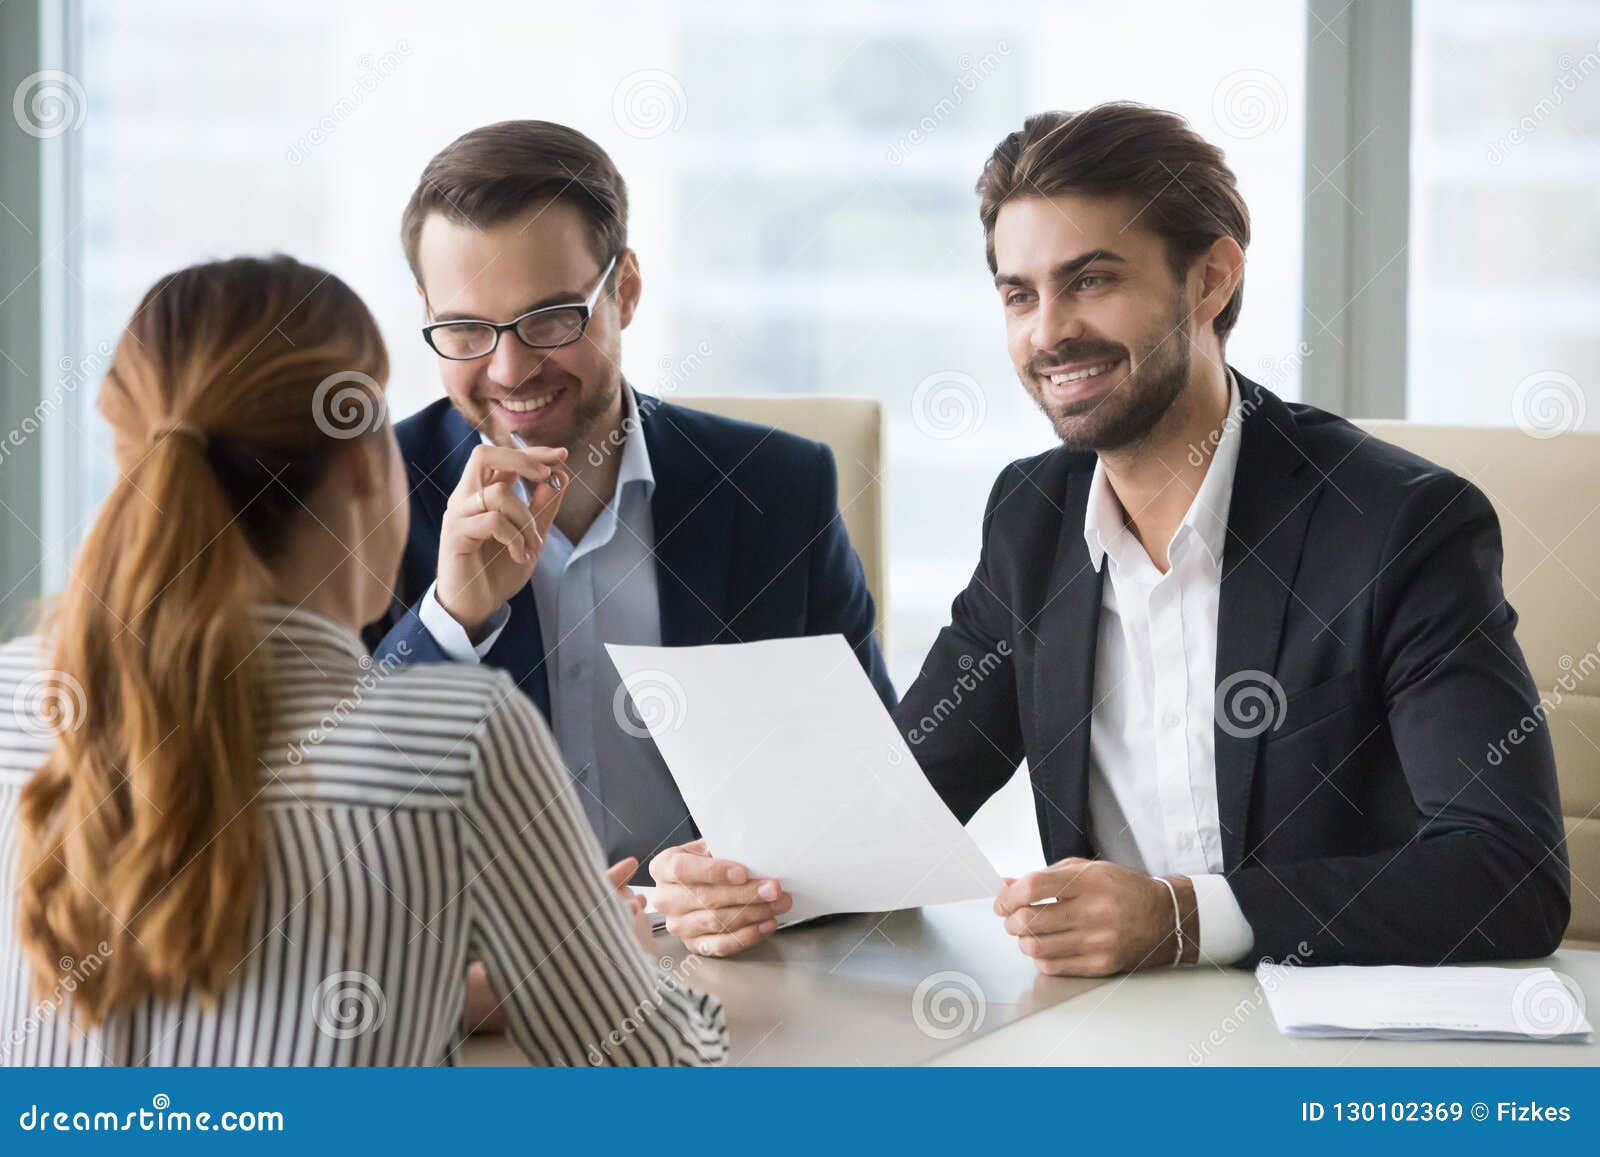 happy hr manager with resume looking at female job seeker.